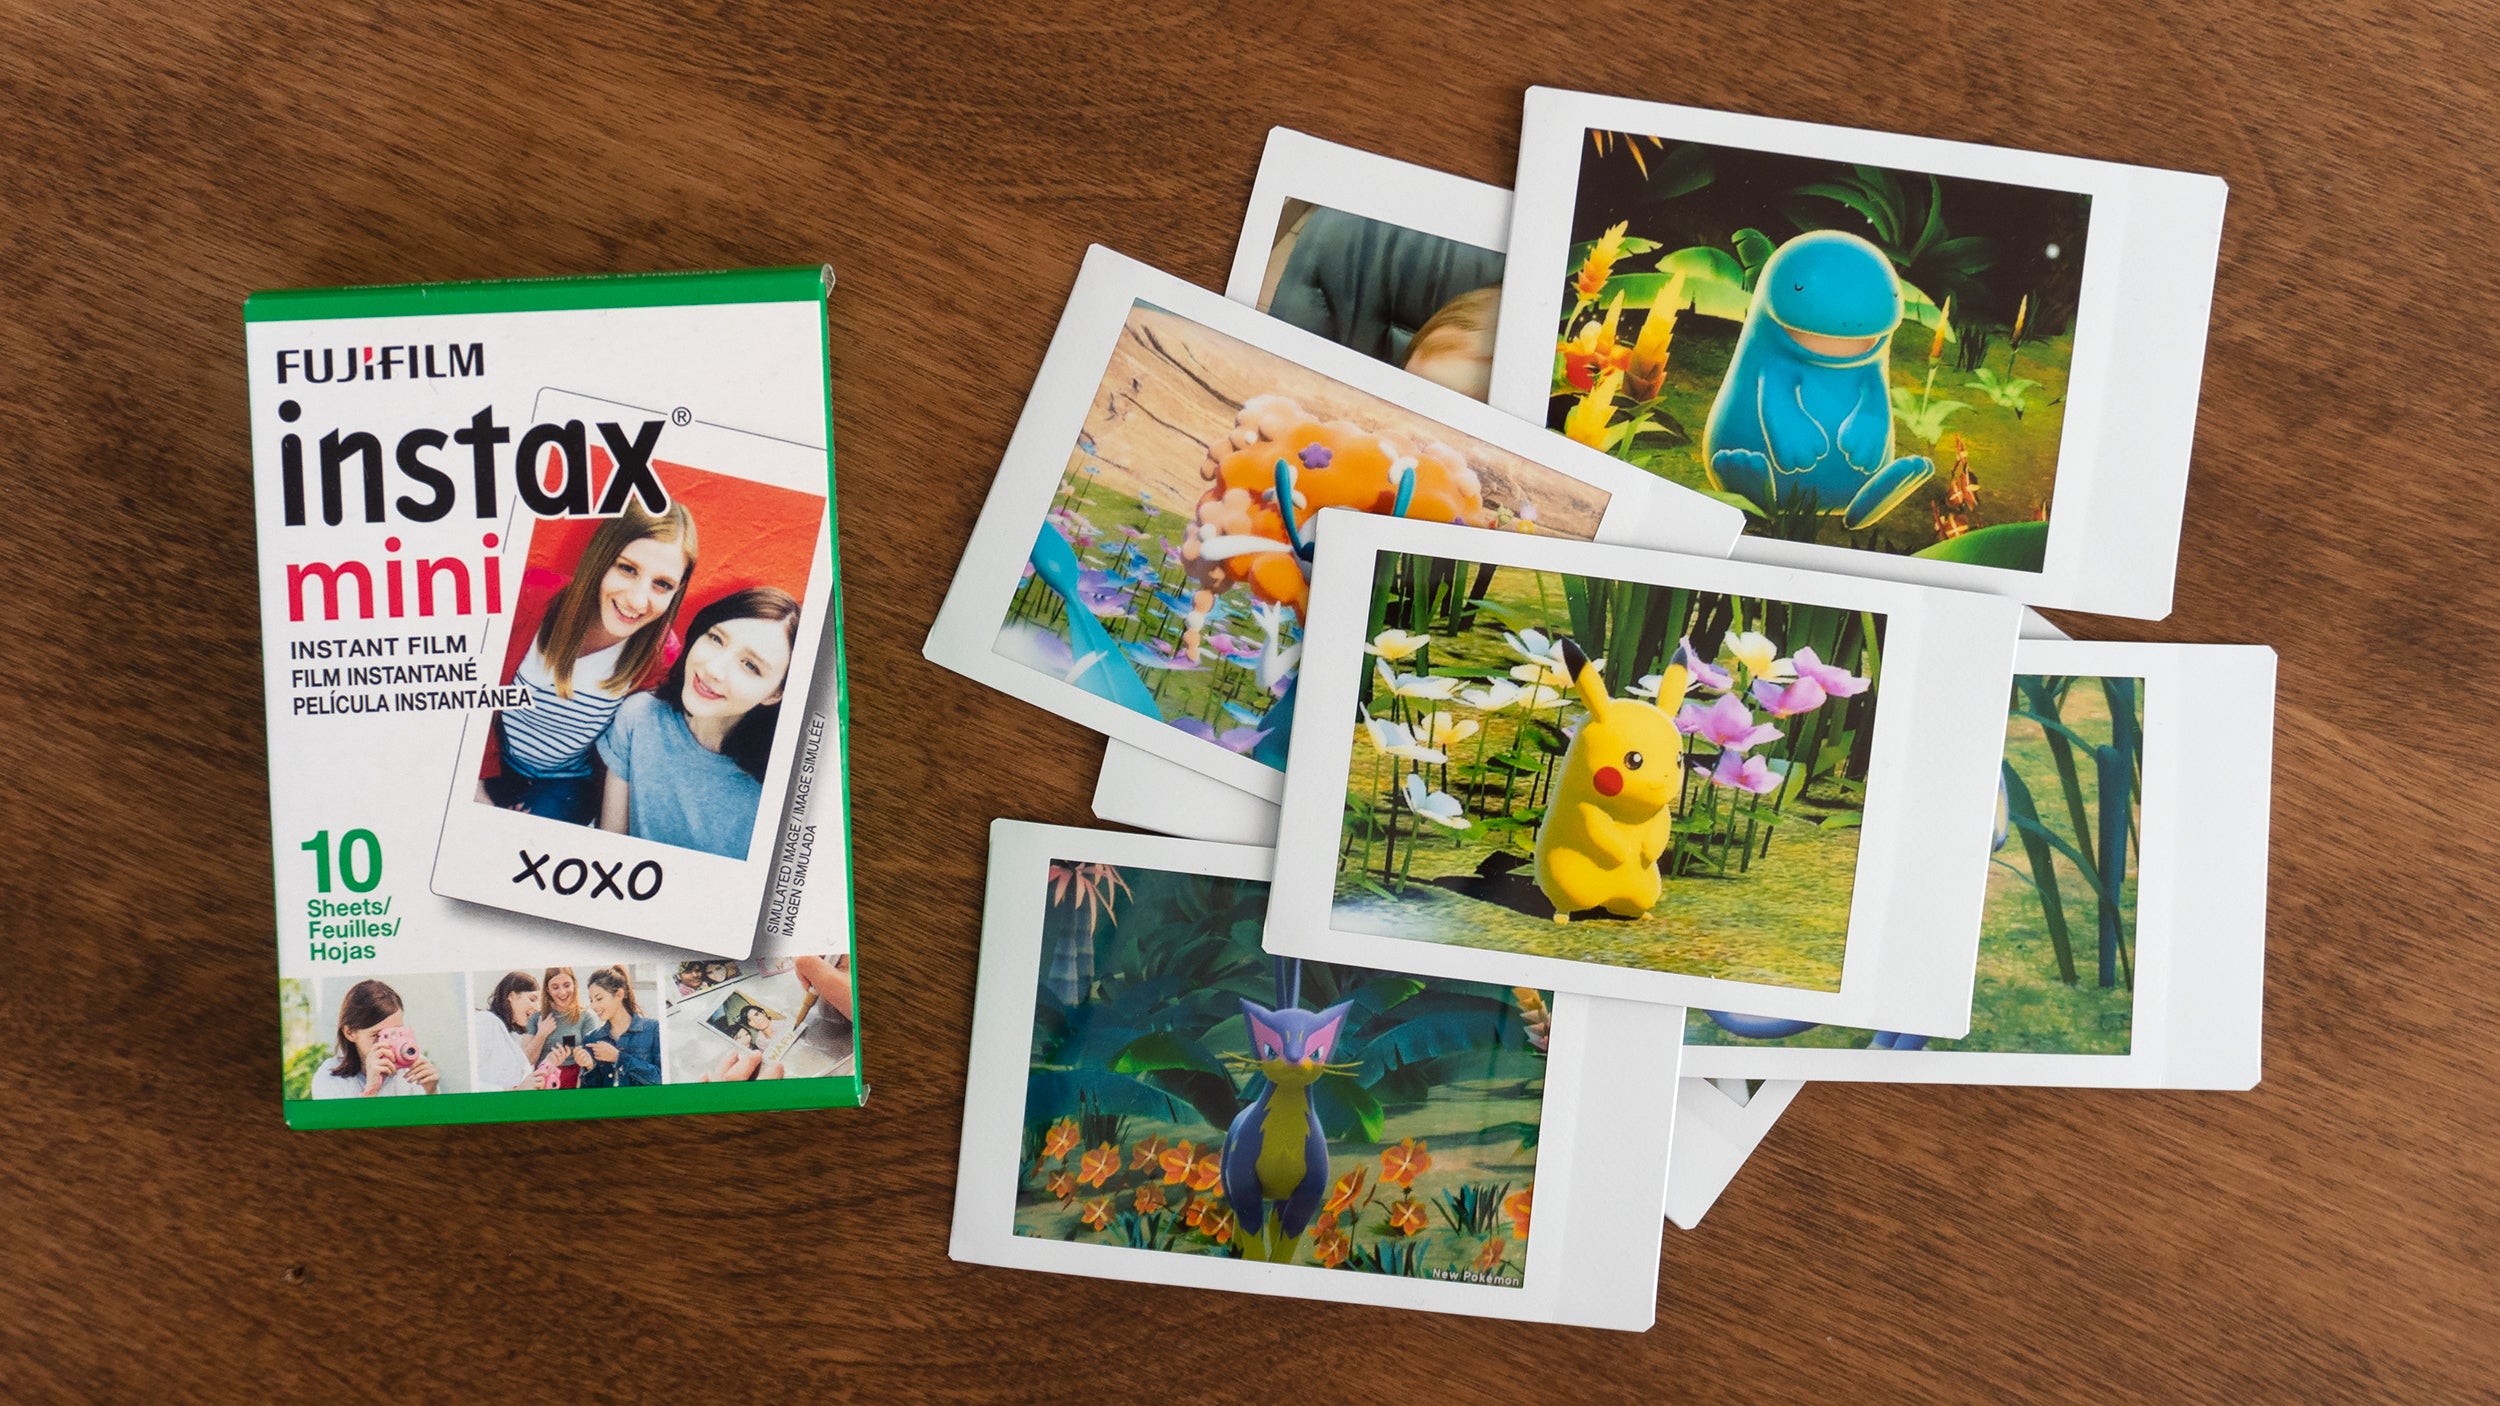 There's no denying that the cost per print for a printer that uses instant film stock is expensive, even if you're buying film stock in bulk. (Photo: Andrew Liszewski/Gizmodo)